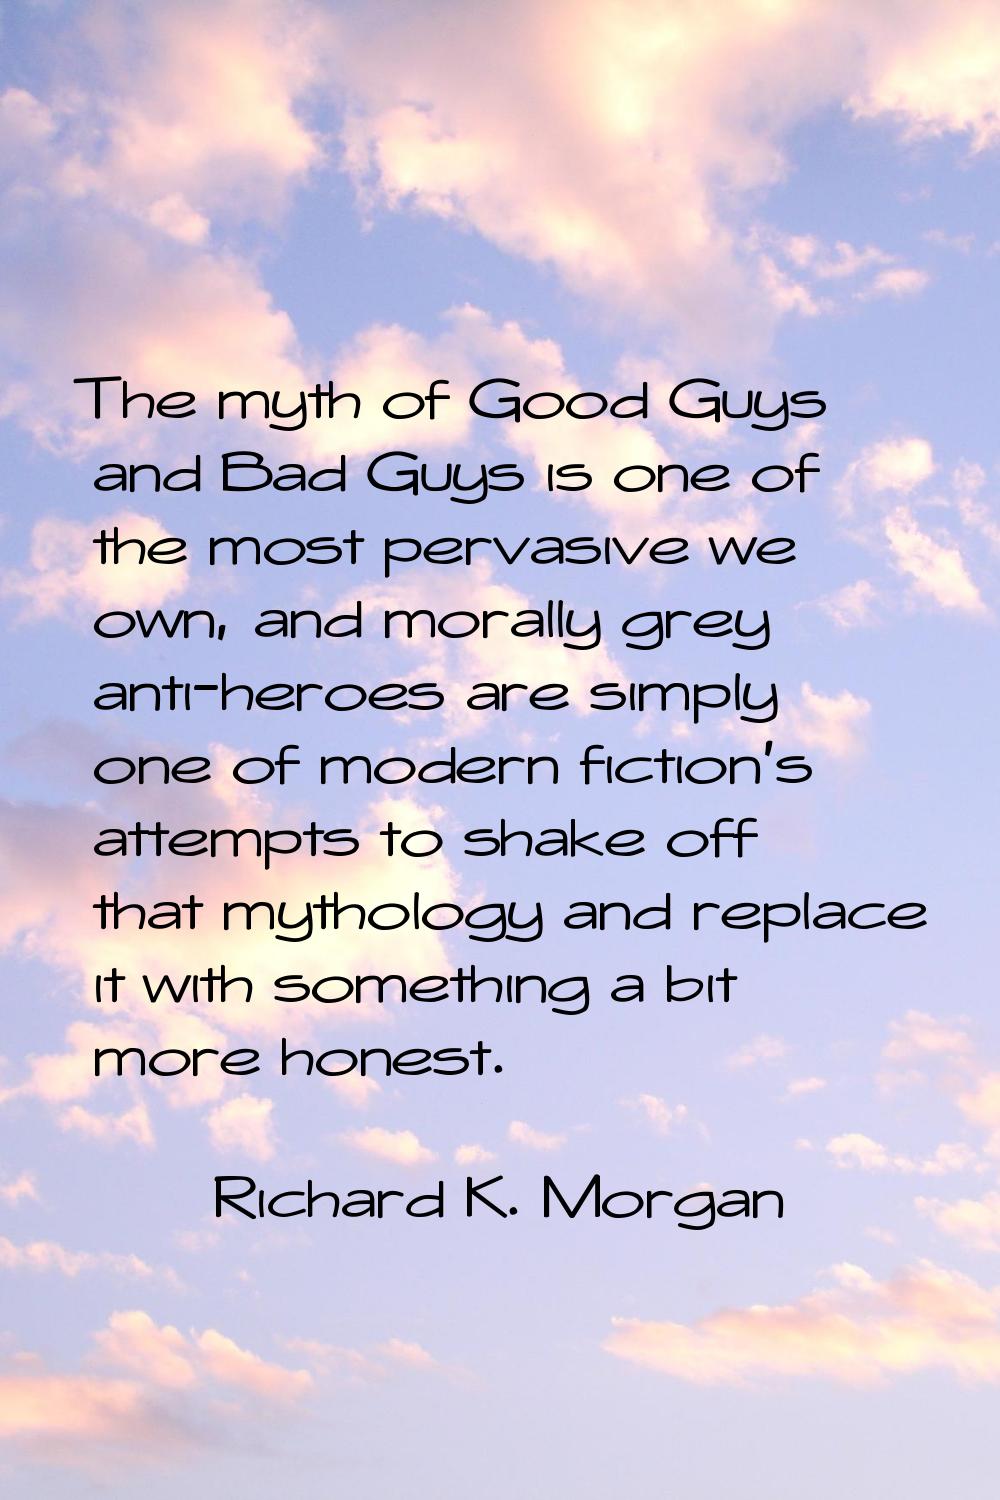 The myth of Good Guys and Bad Guys is one of the most pervasive we own, and morally grey anti-heroe